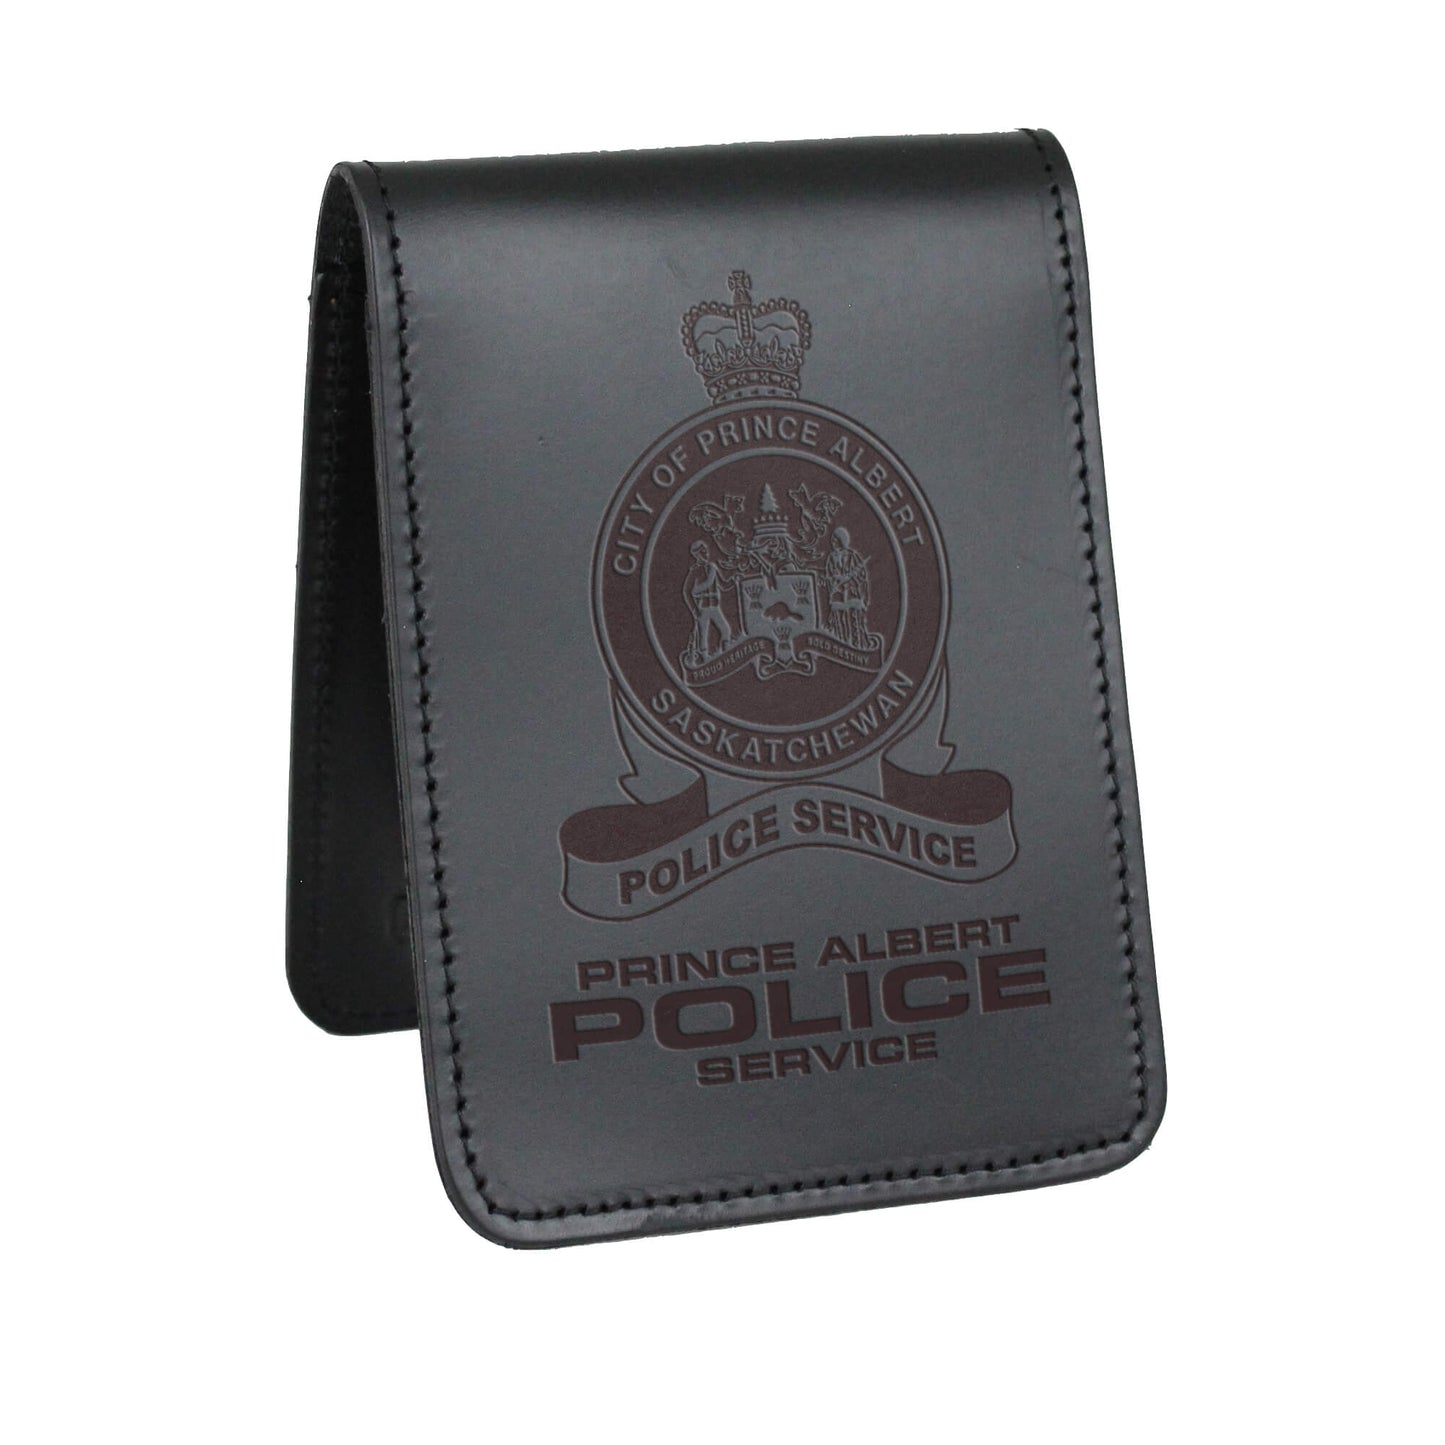 Prince Albert Police Service Notebook Cover